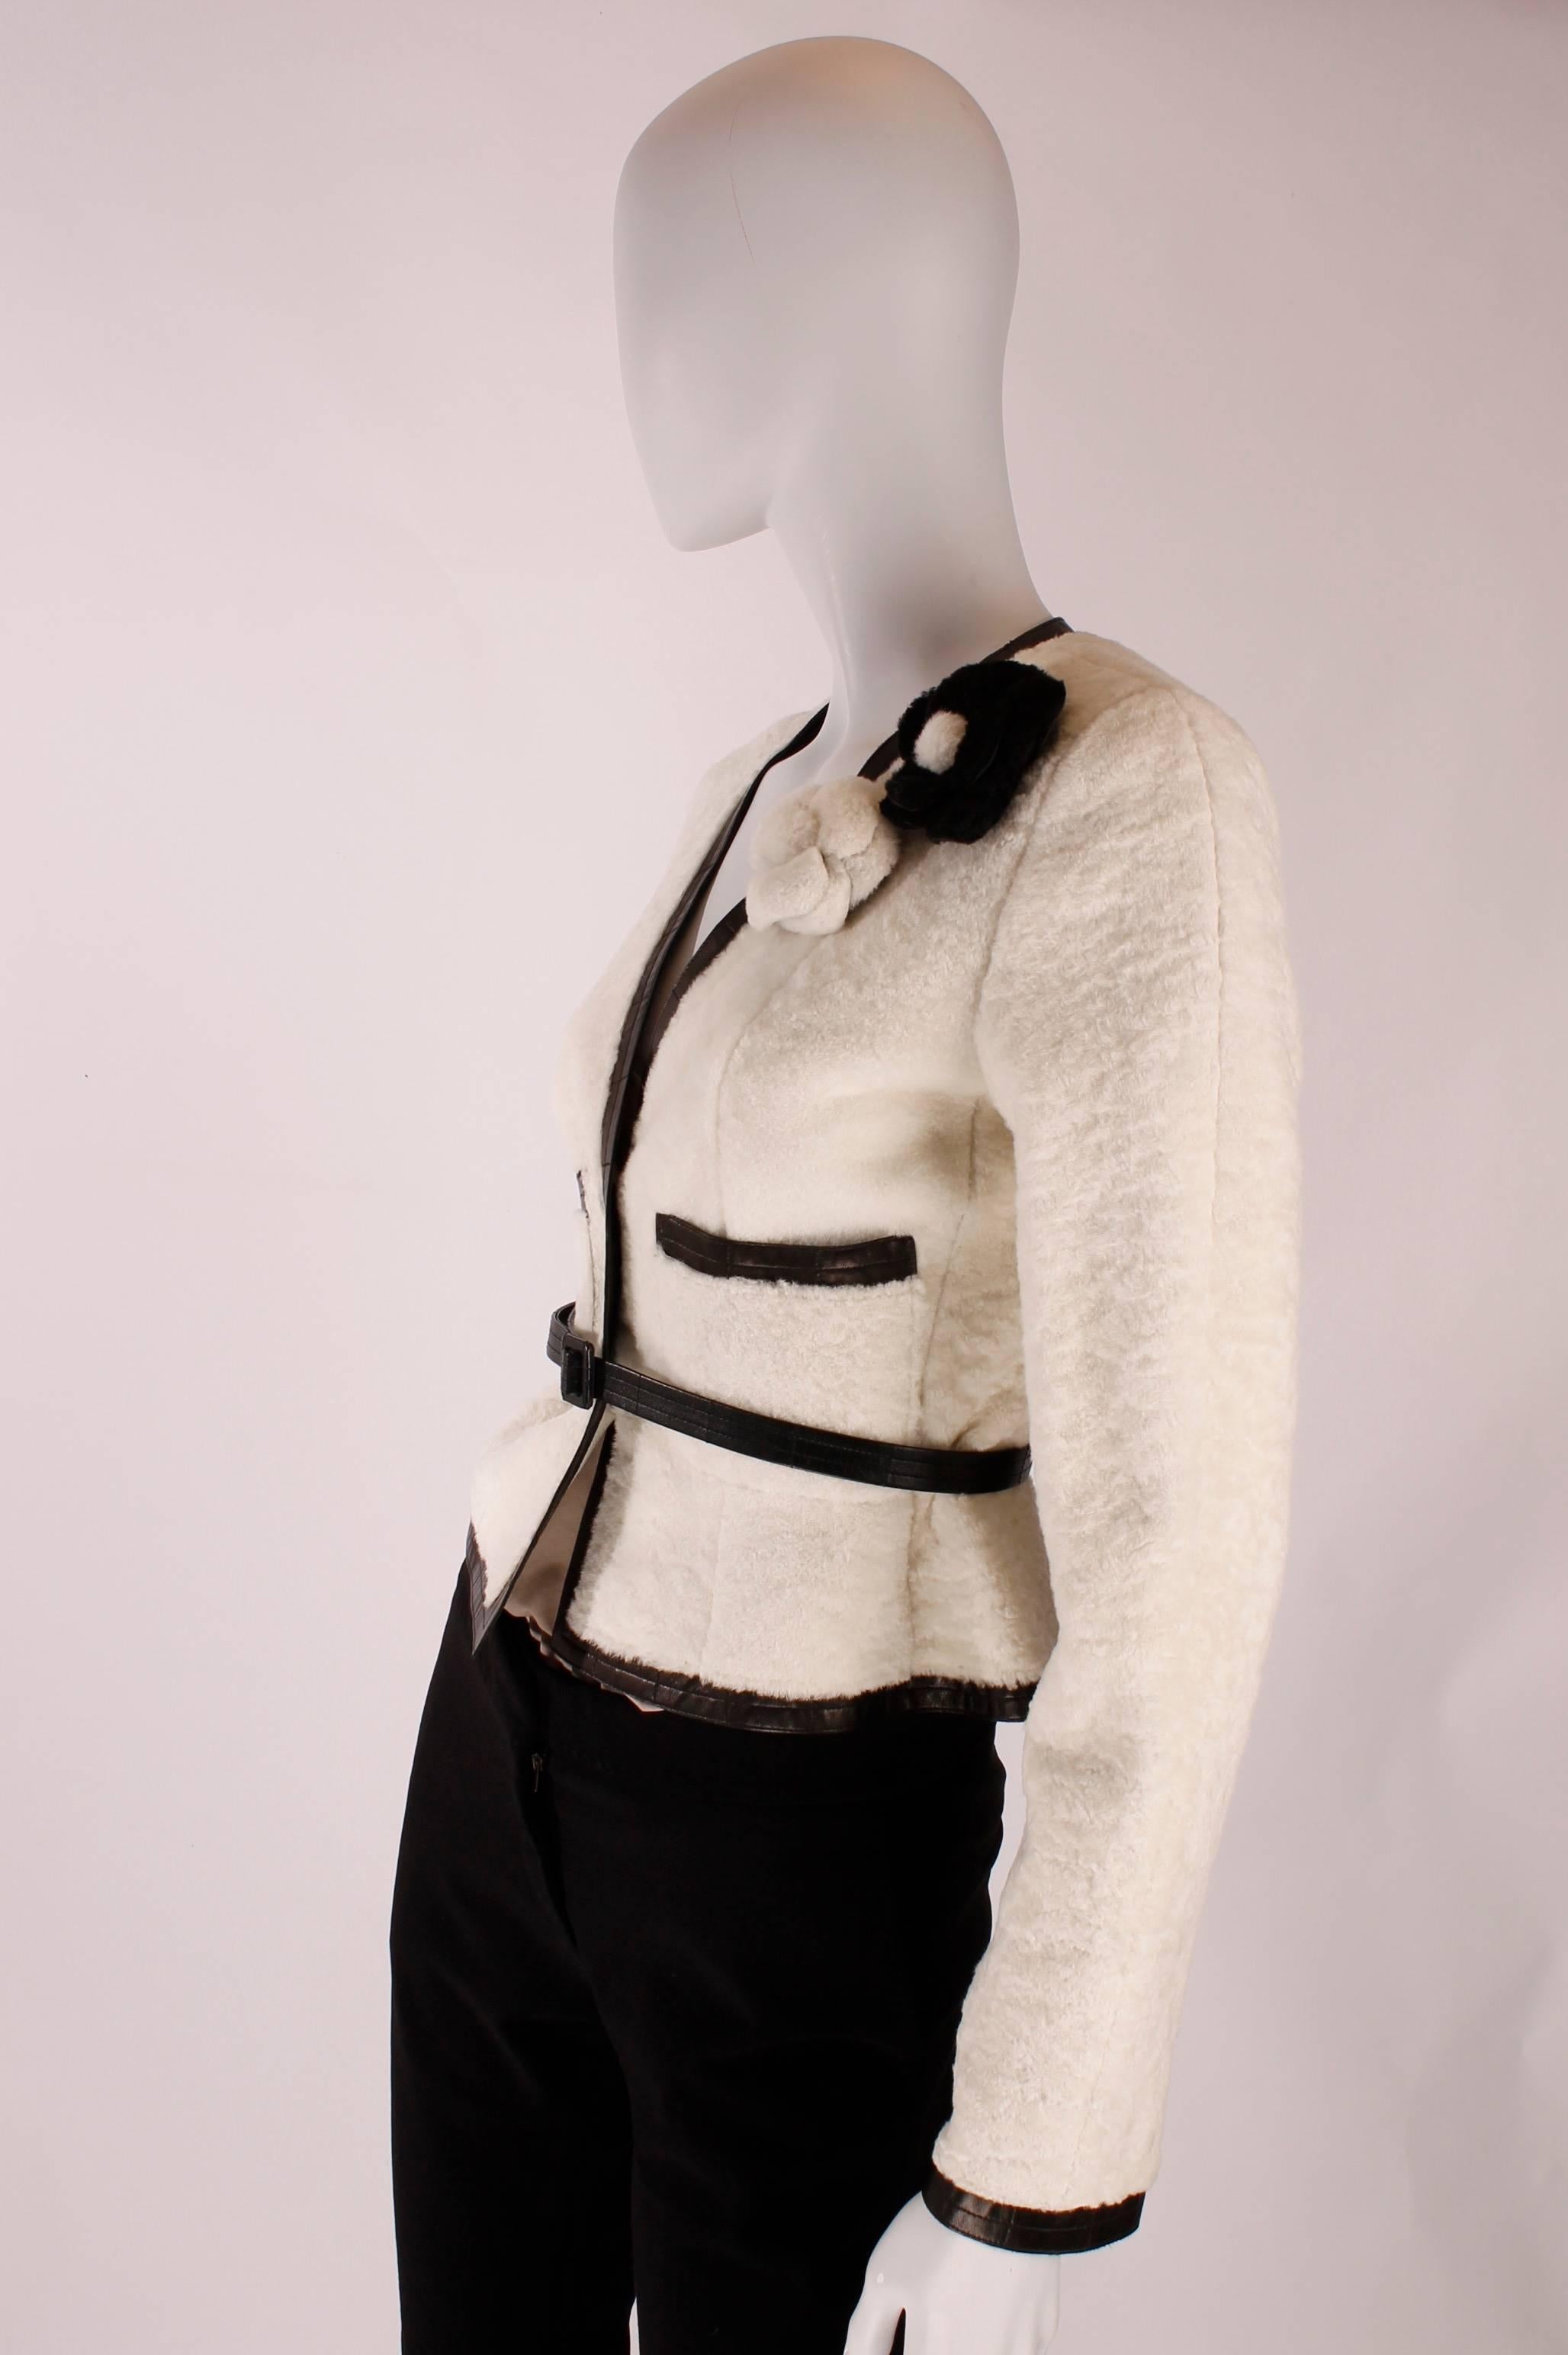 Really stunning Chanel jacket in lambskin leather, used 'inside-out'.

The soft and hairy side is on the outside, the smooth leather side on the interior. Trimmed with black leather on the hems, sleeves and pockets. Two white leather buttons with